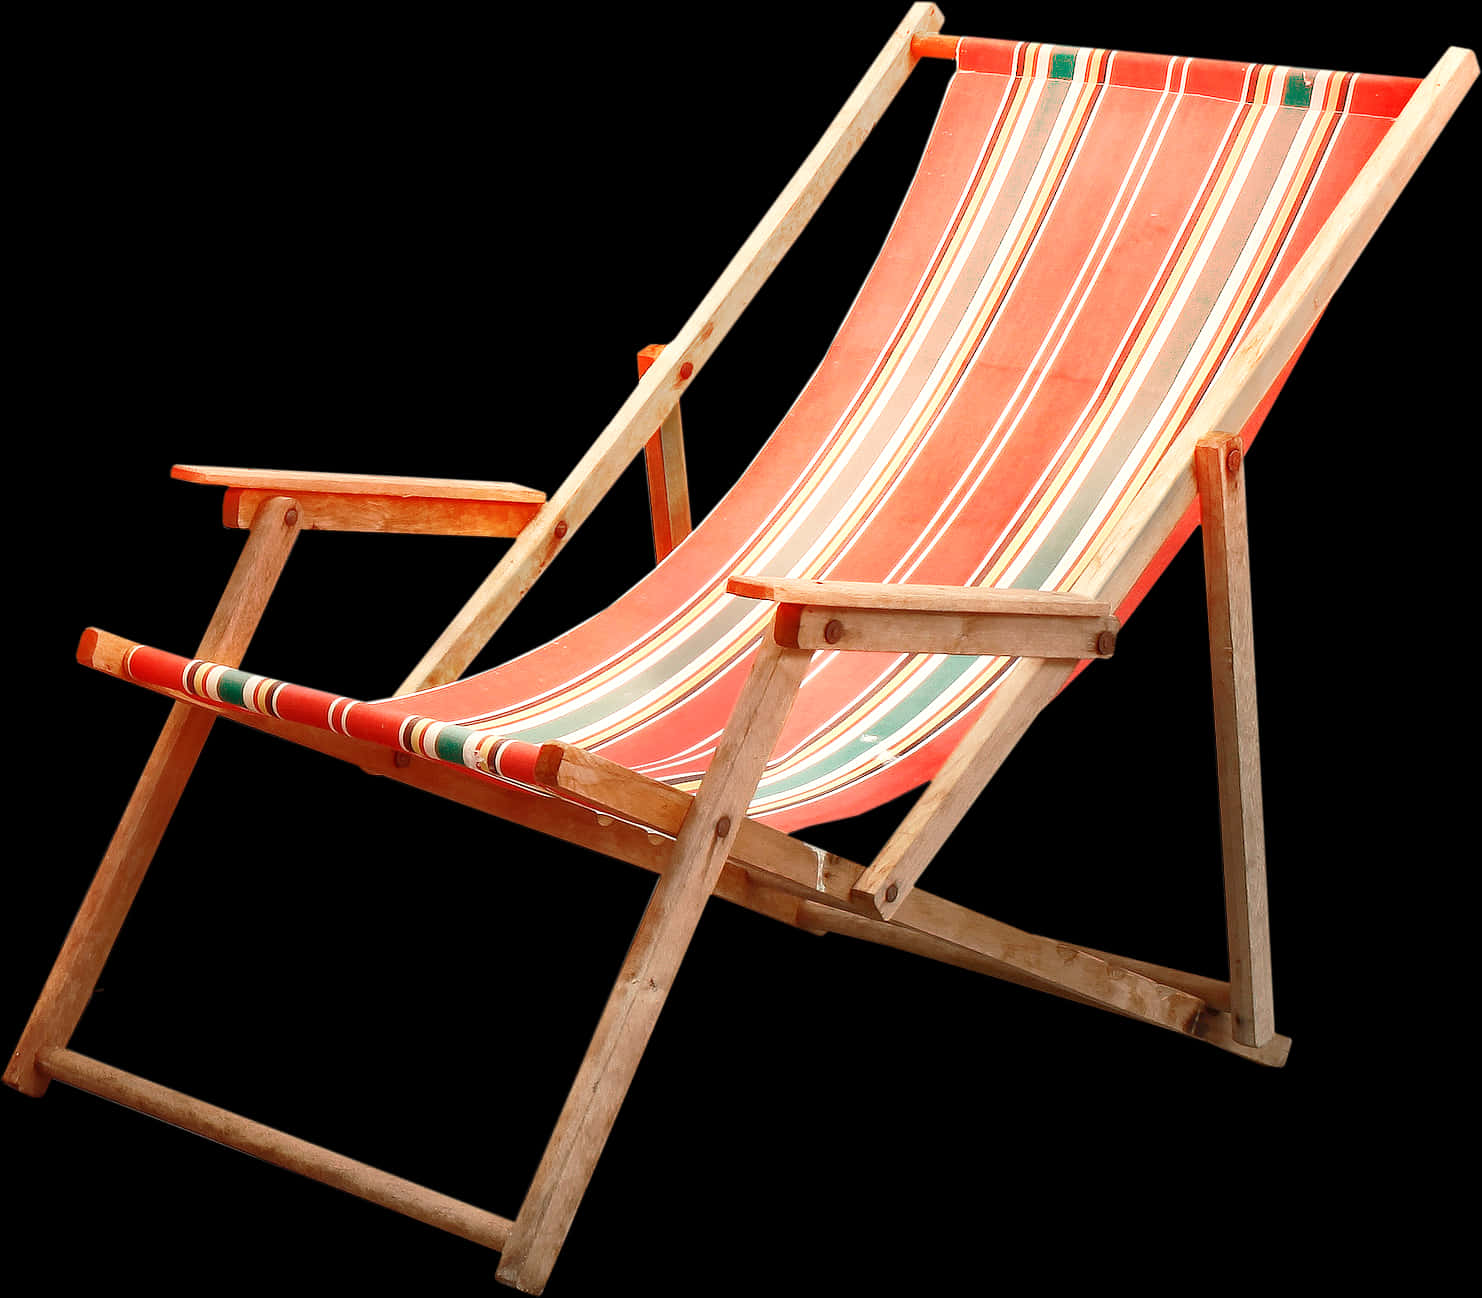 Striped Deck Chair Black Background PNG image